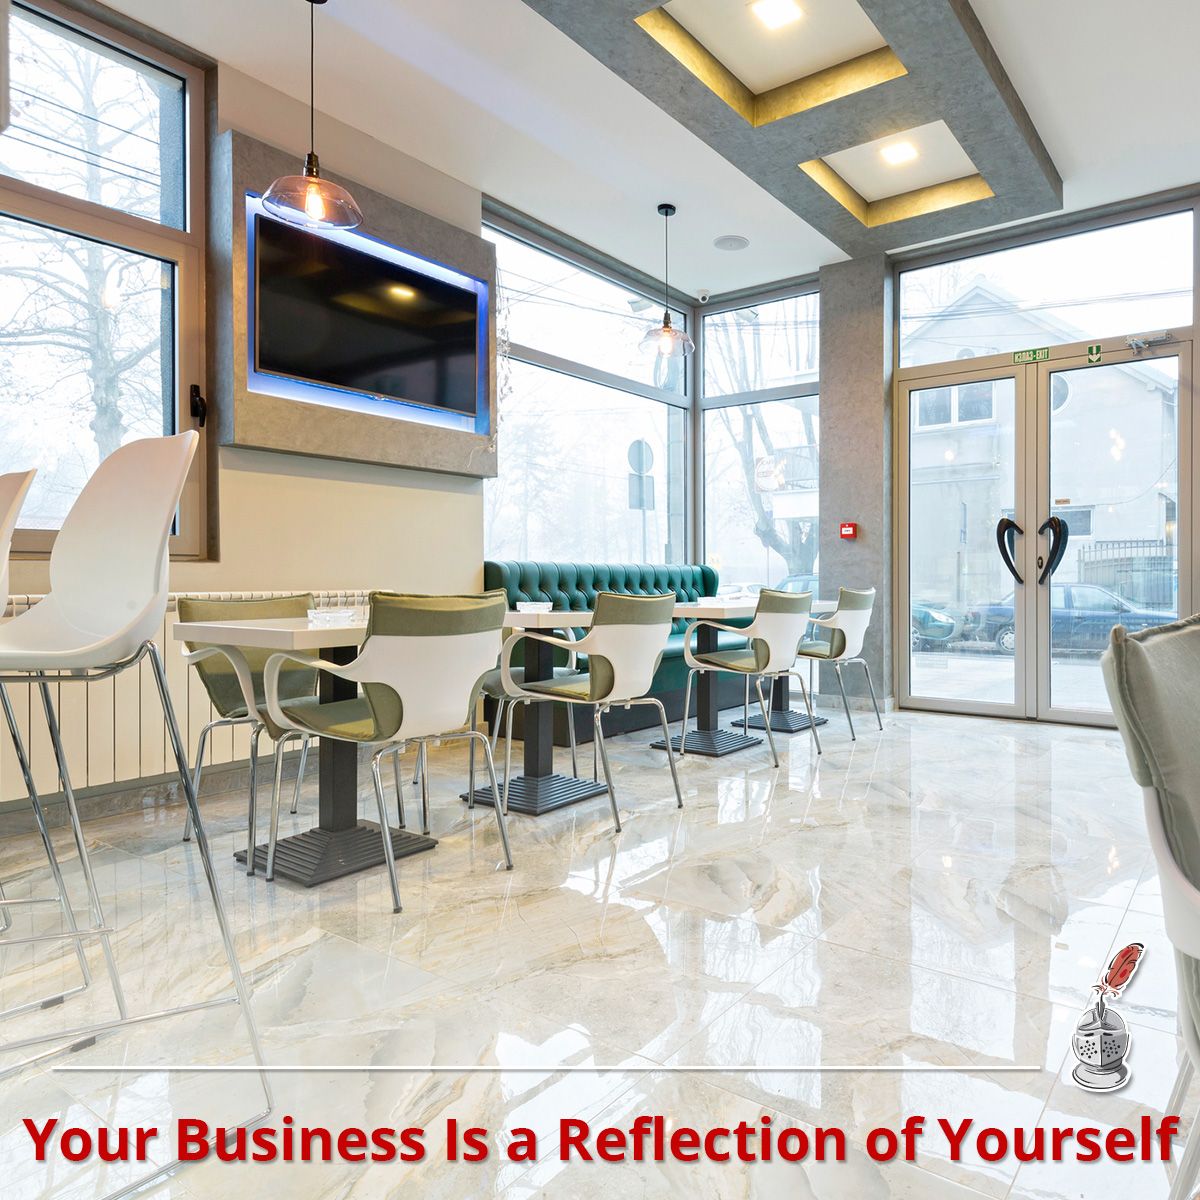 Your Business Is a Reflection of Yourself